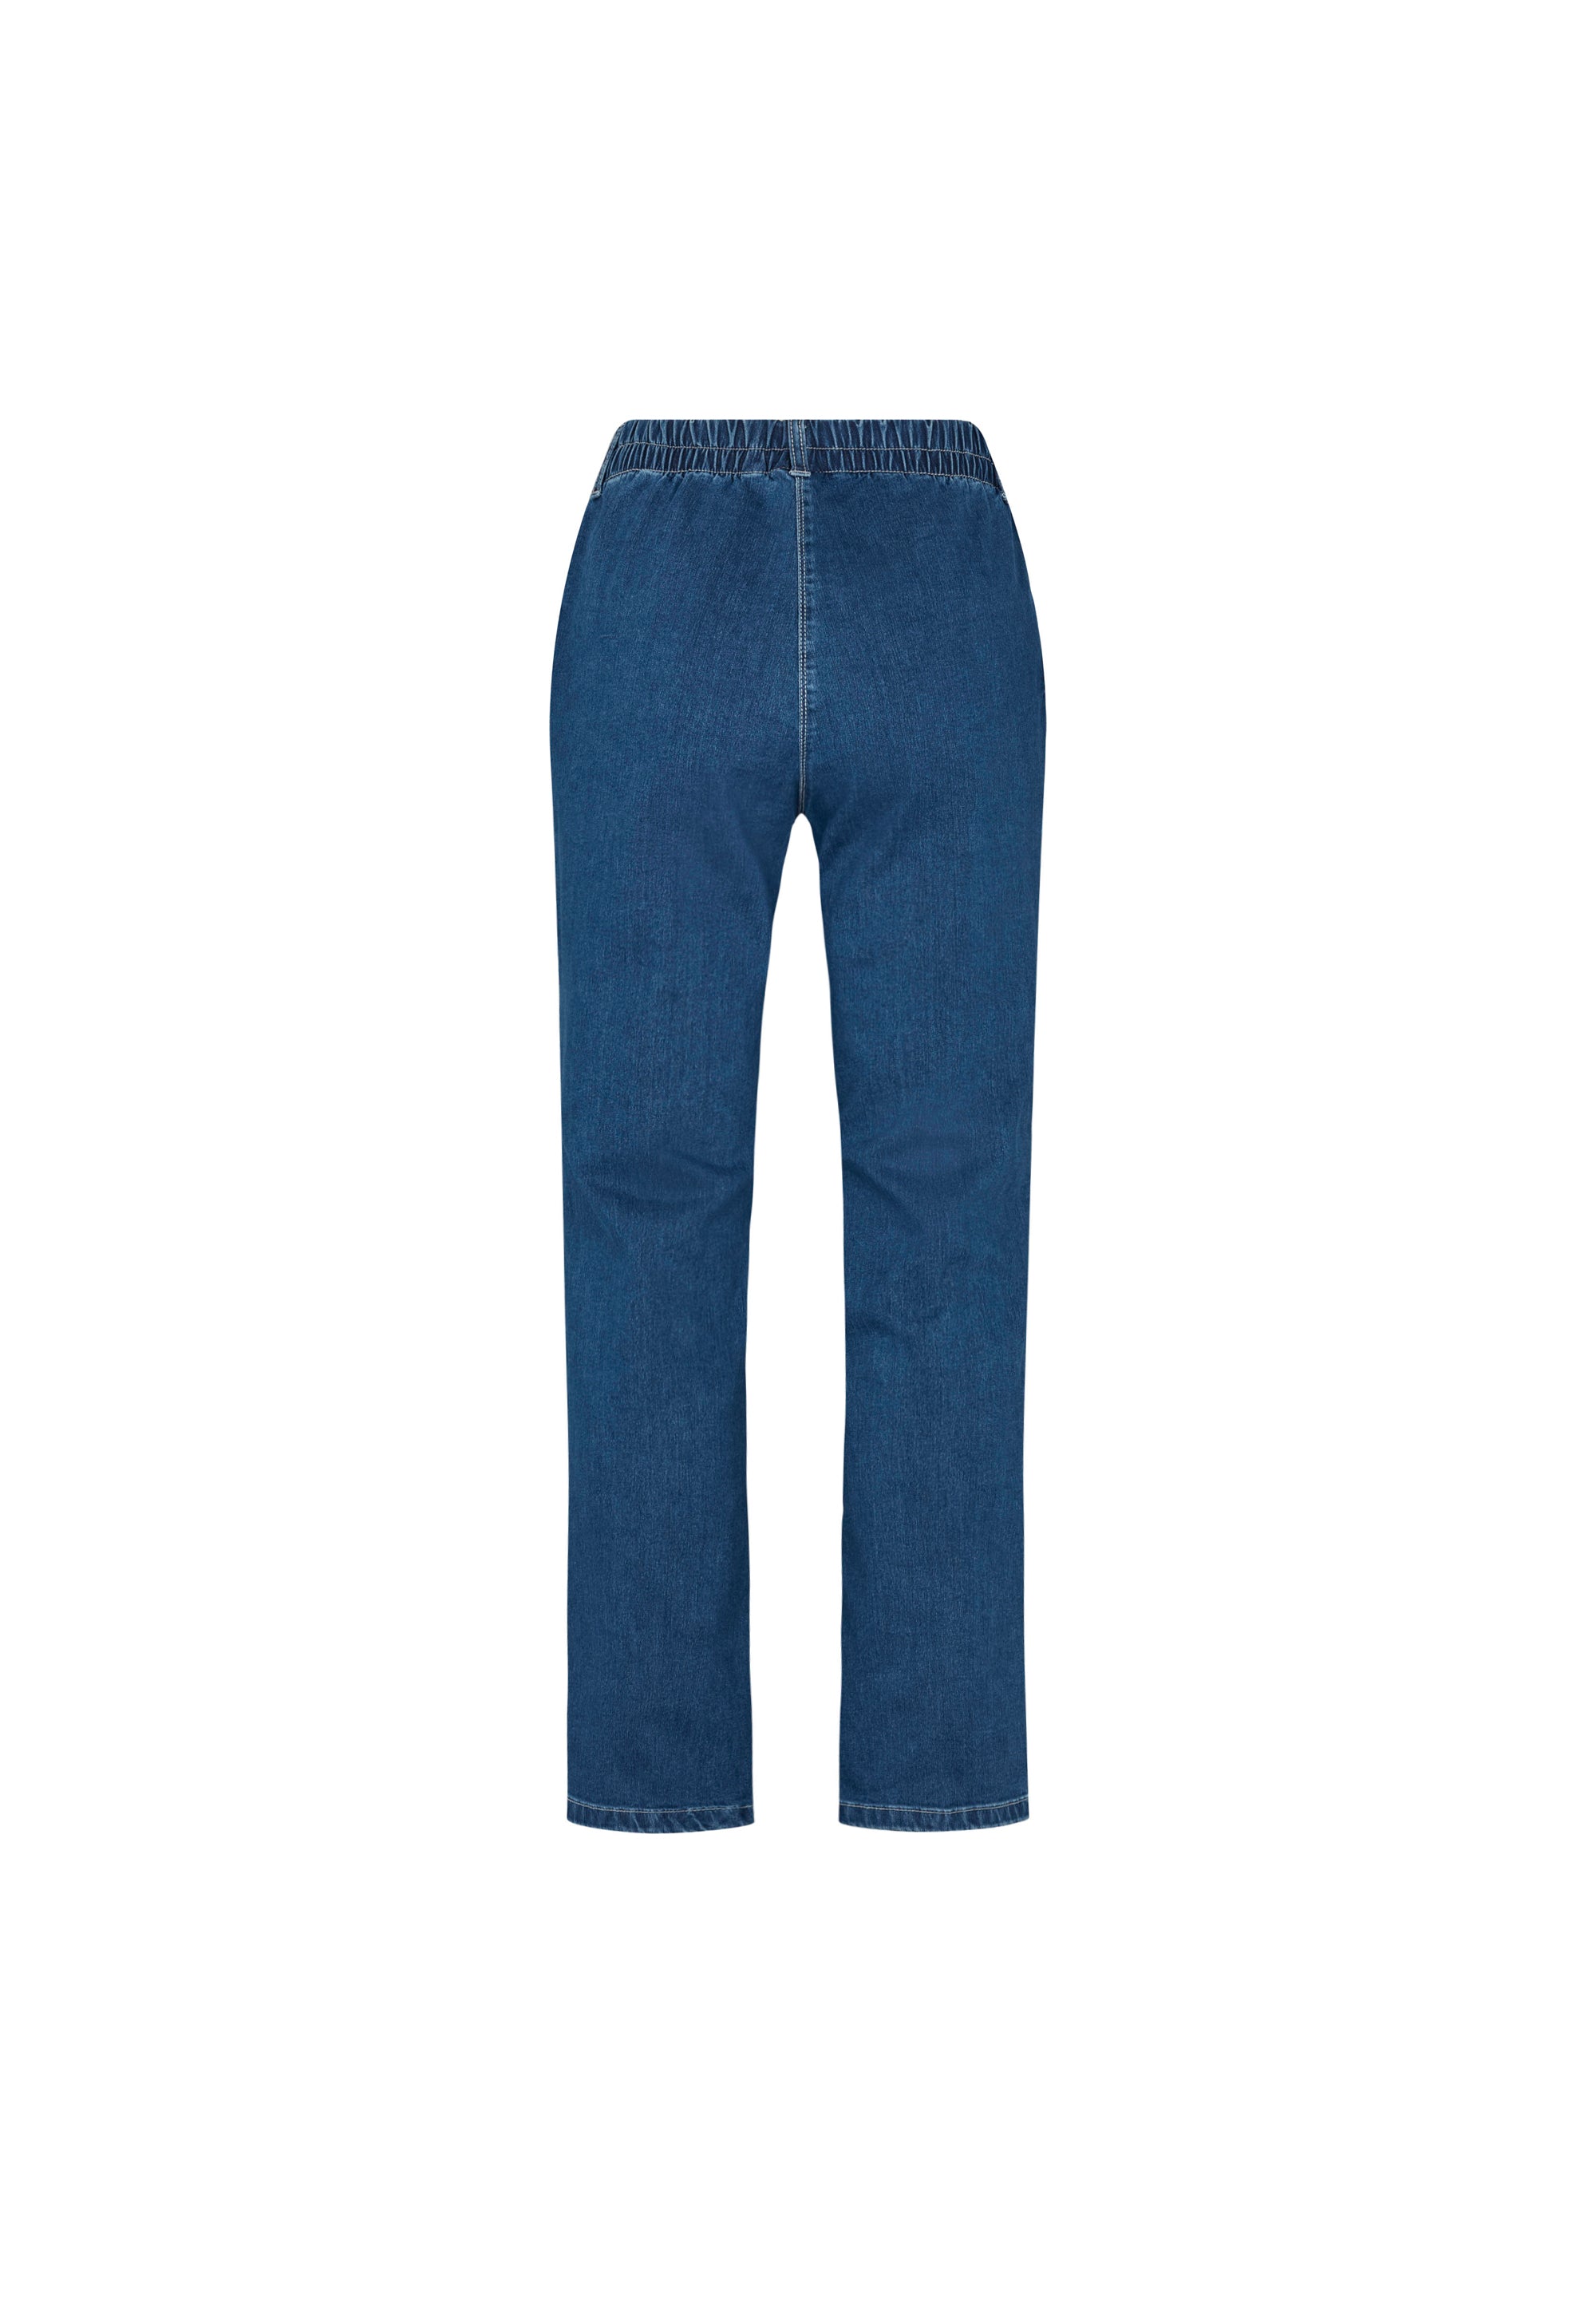 LAURIE Violet Relaxed - Medium Length Trousers RELAXED 49401 Blue Denim